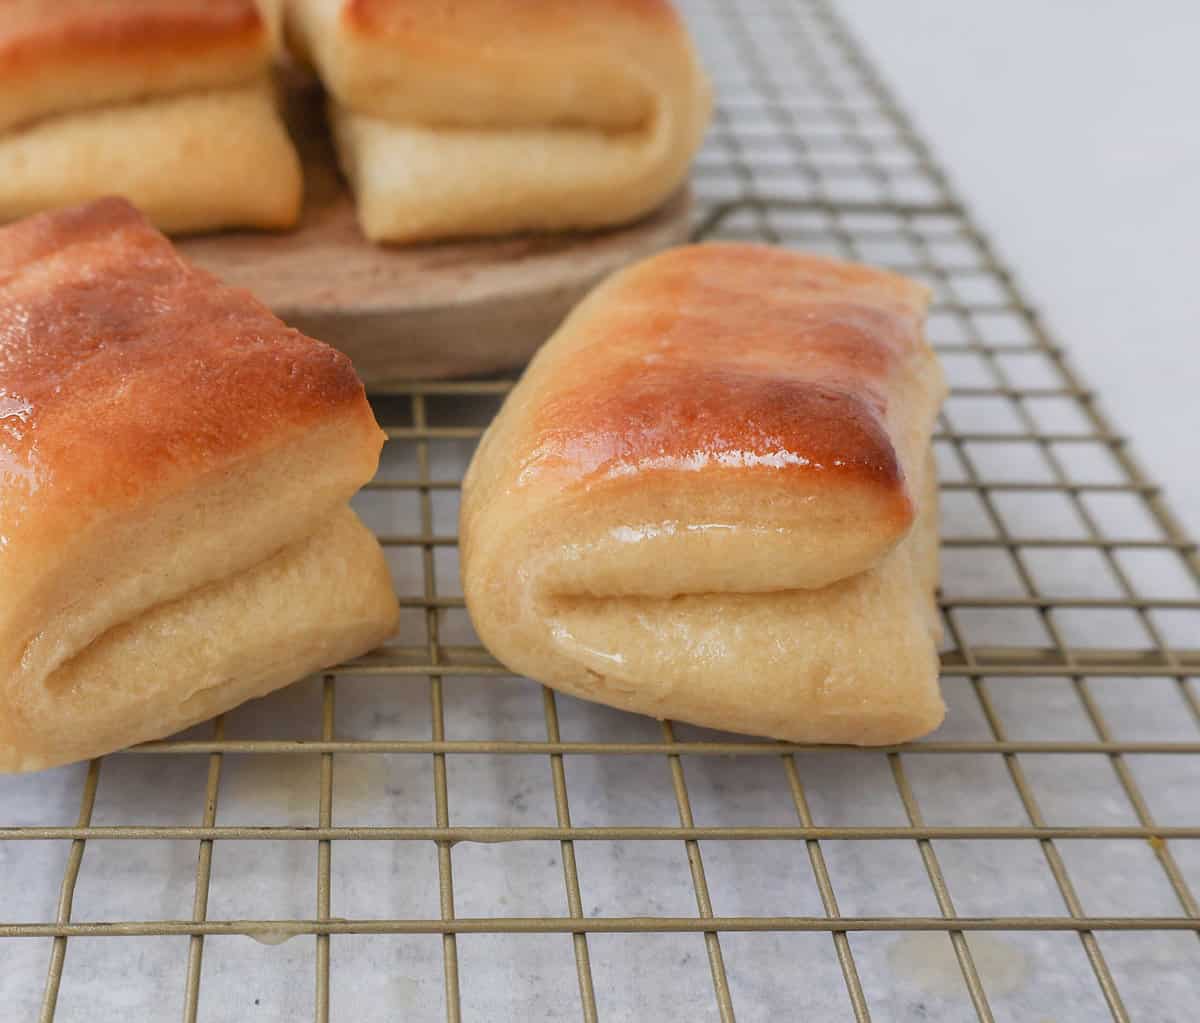 The Famous Parker House Rolls are light, fluffy, and buttery with a secret ingredient that makes them tender and melt in your mouth. This is the best Parker house roll recipe!